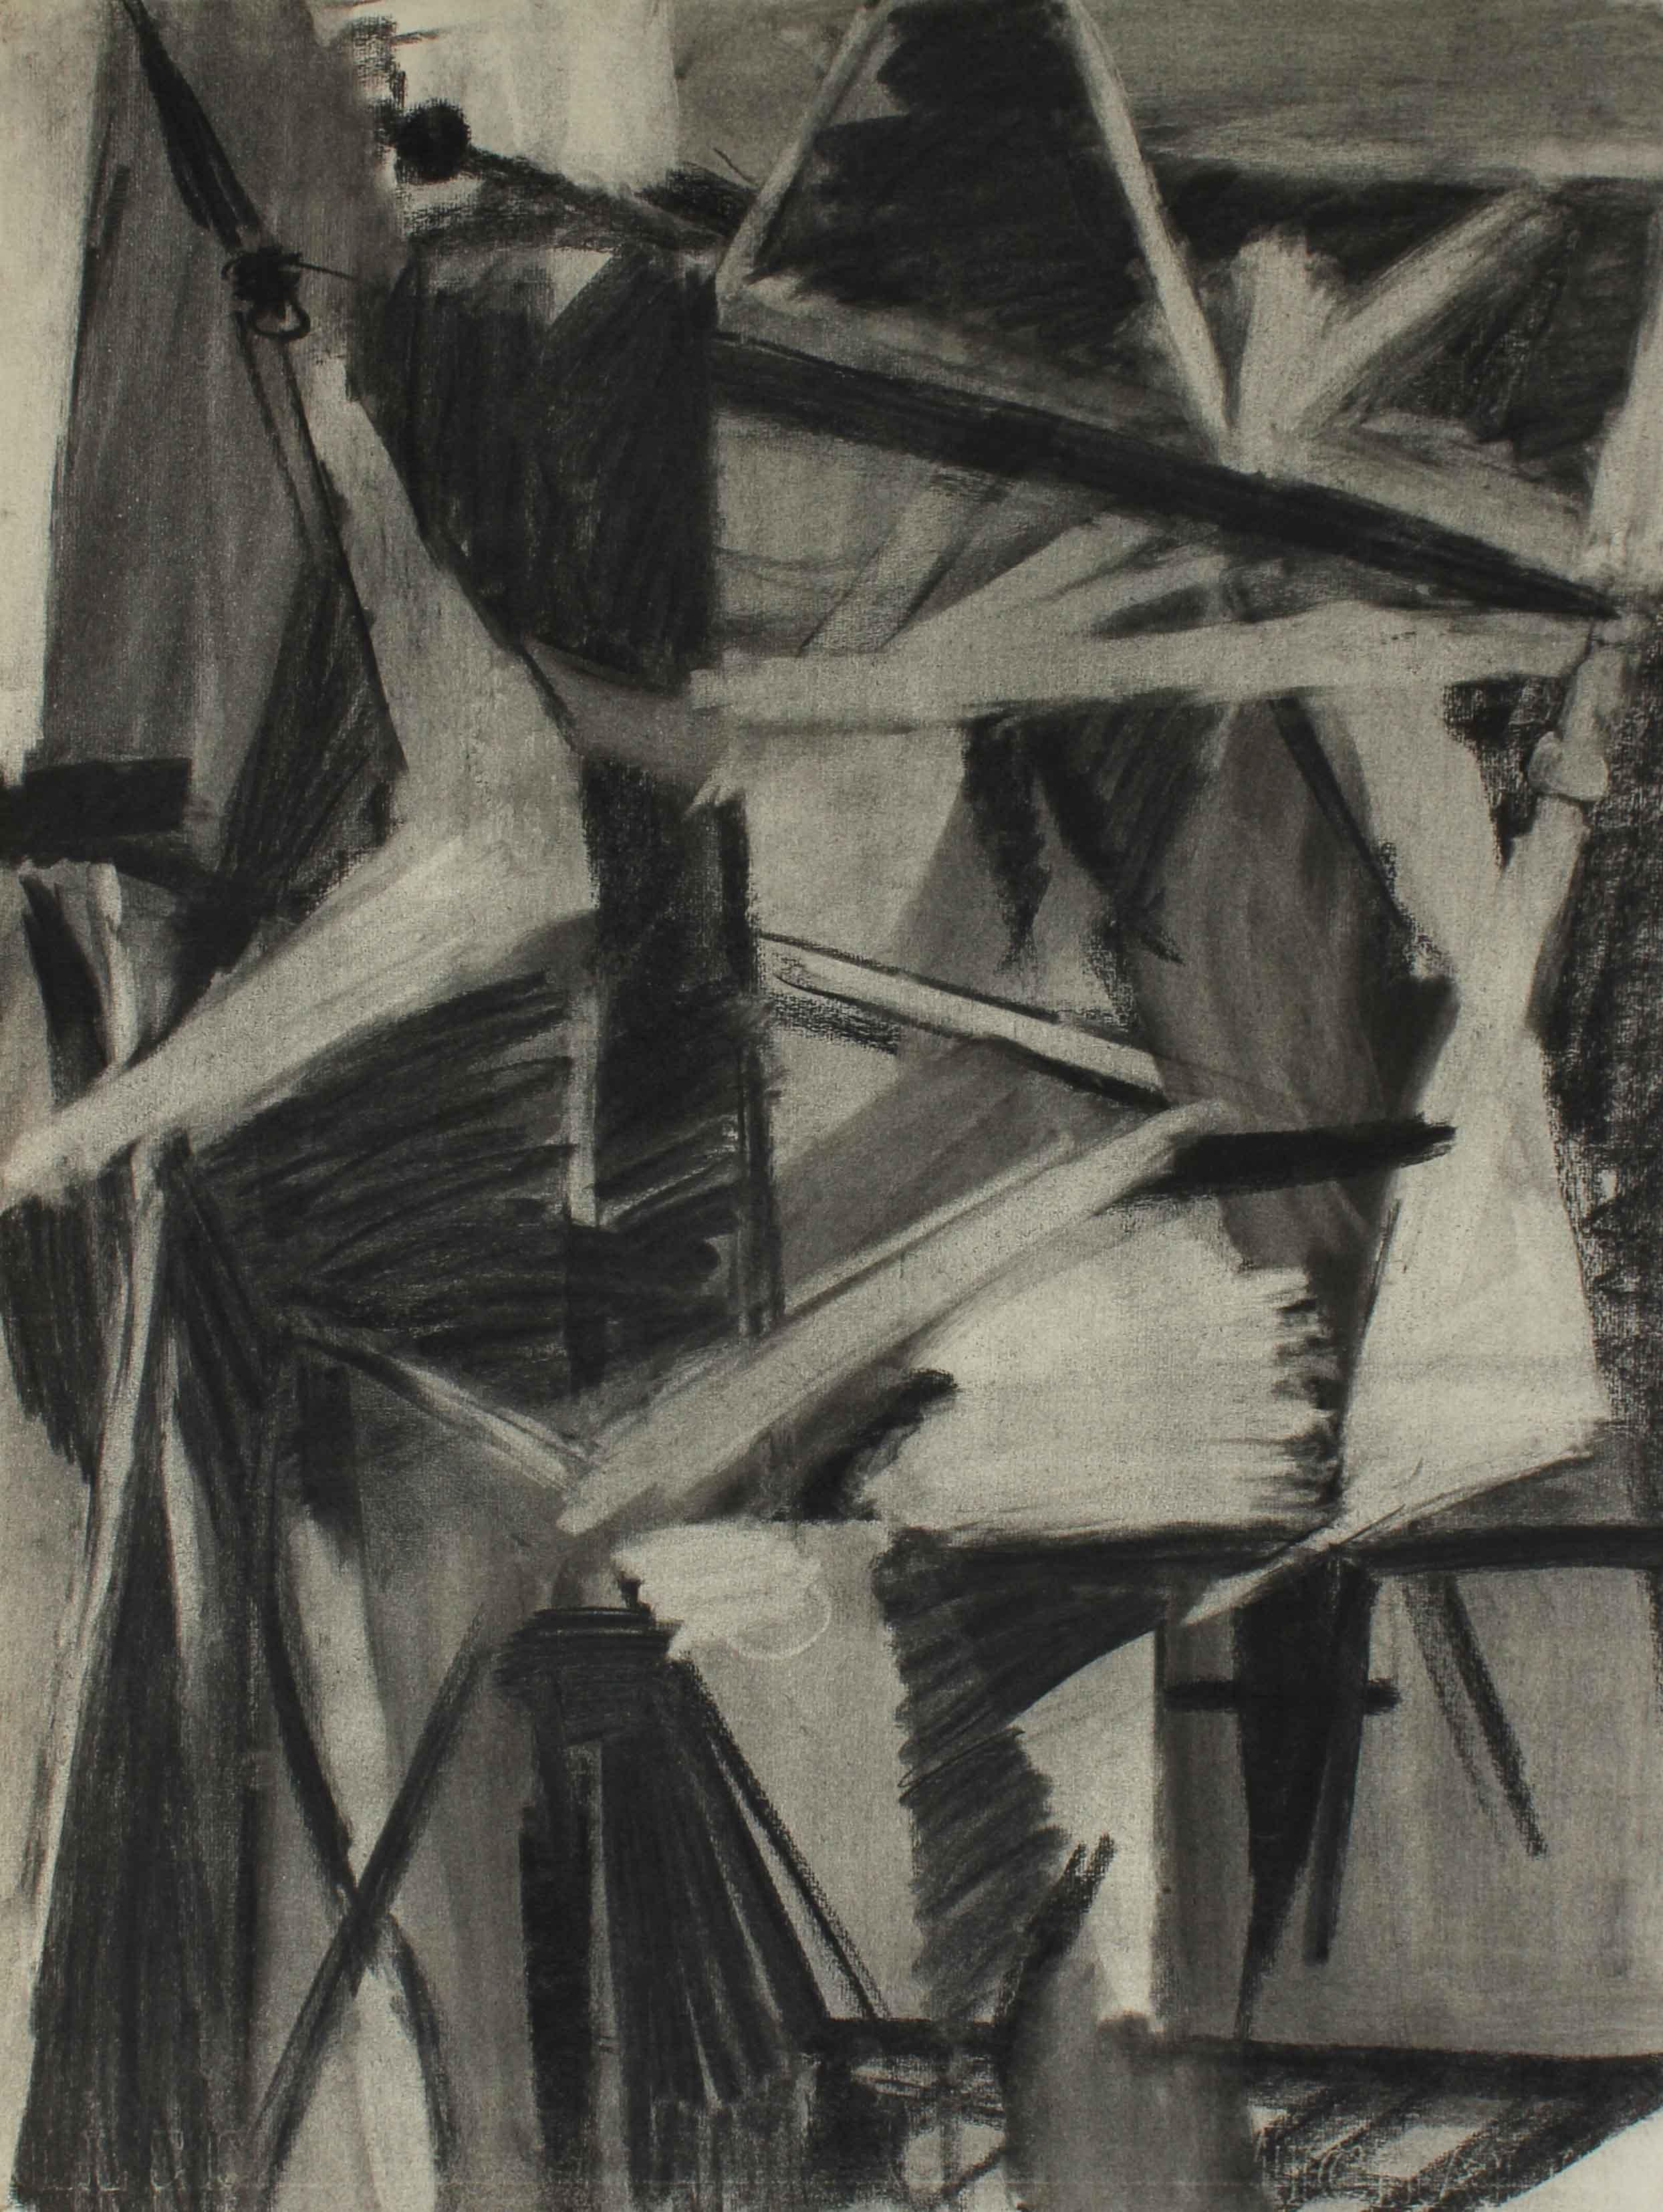 Seymour Tubis Abstract Drawing - Monochromatic Cubist Abstract in Charcoal, 1950